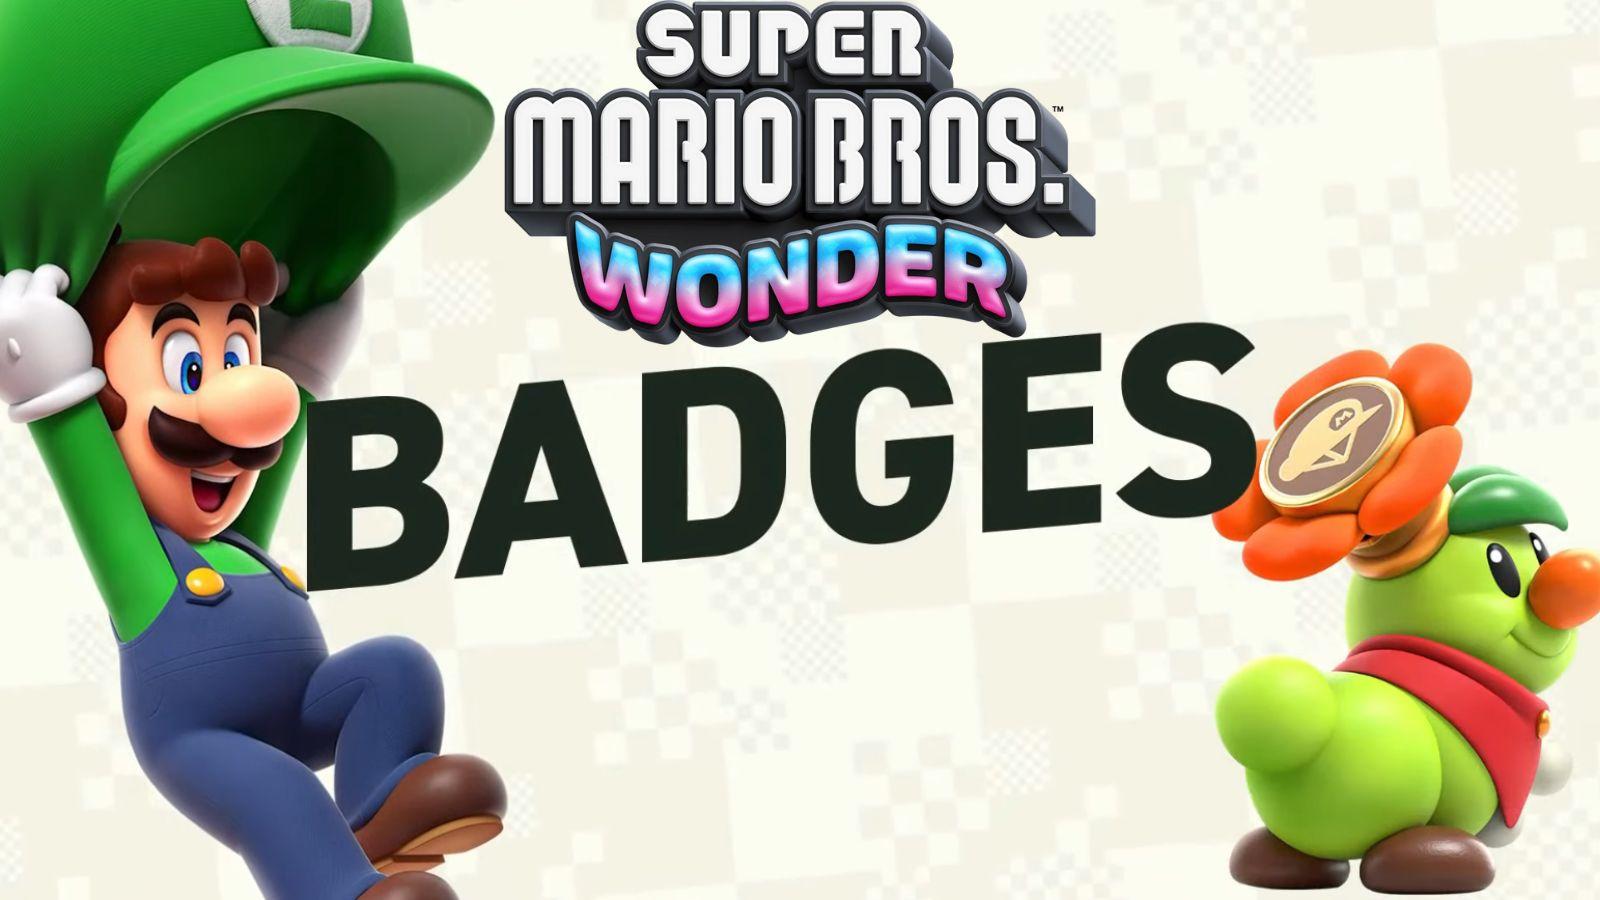 Super Mario Bros. Wonder Director: Online Multiplayer Had to Be  'Stress-Free' for Players